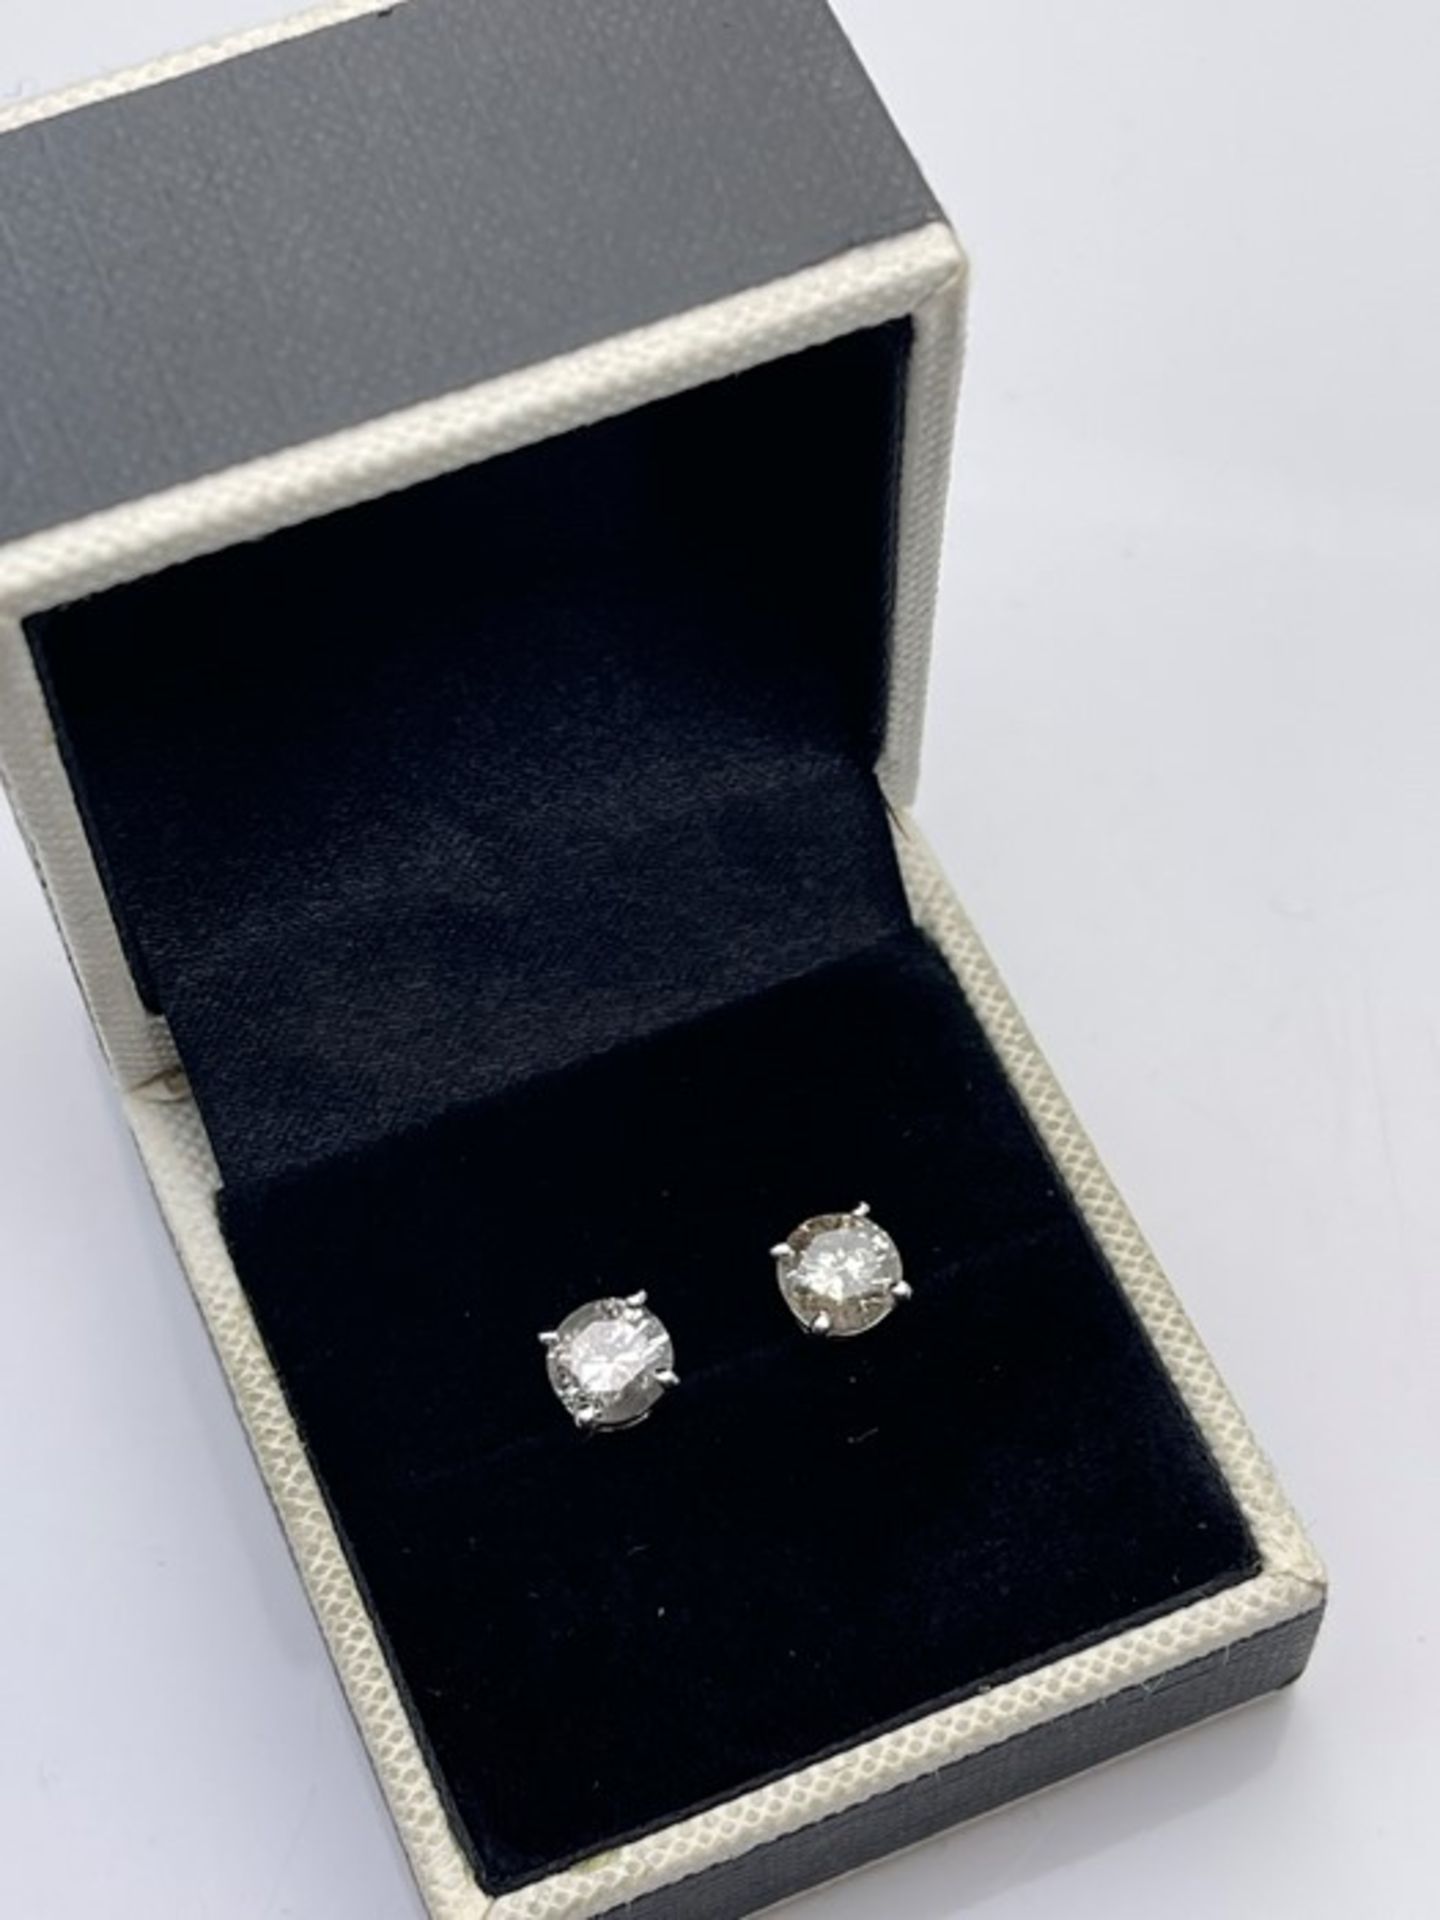 ***£8650.00*** 18CT WHITE GOLD LADIES DIAMOND SOLITAIRE EARRINGS, TOTAL DIAMOND WEIGHT- 2.05CT, - Image 2 of 2